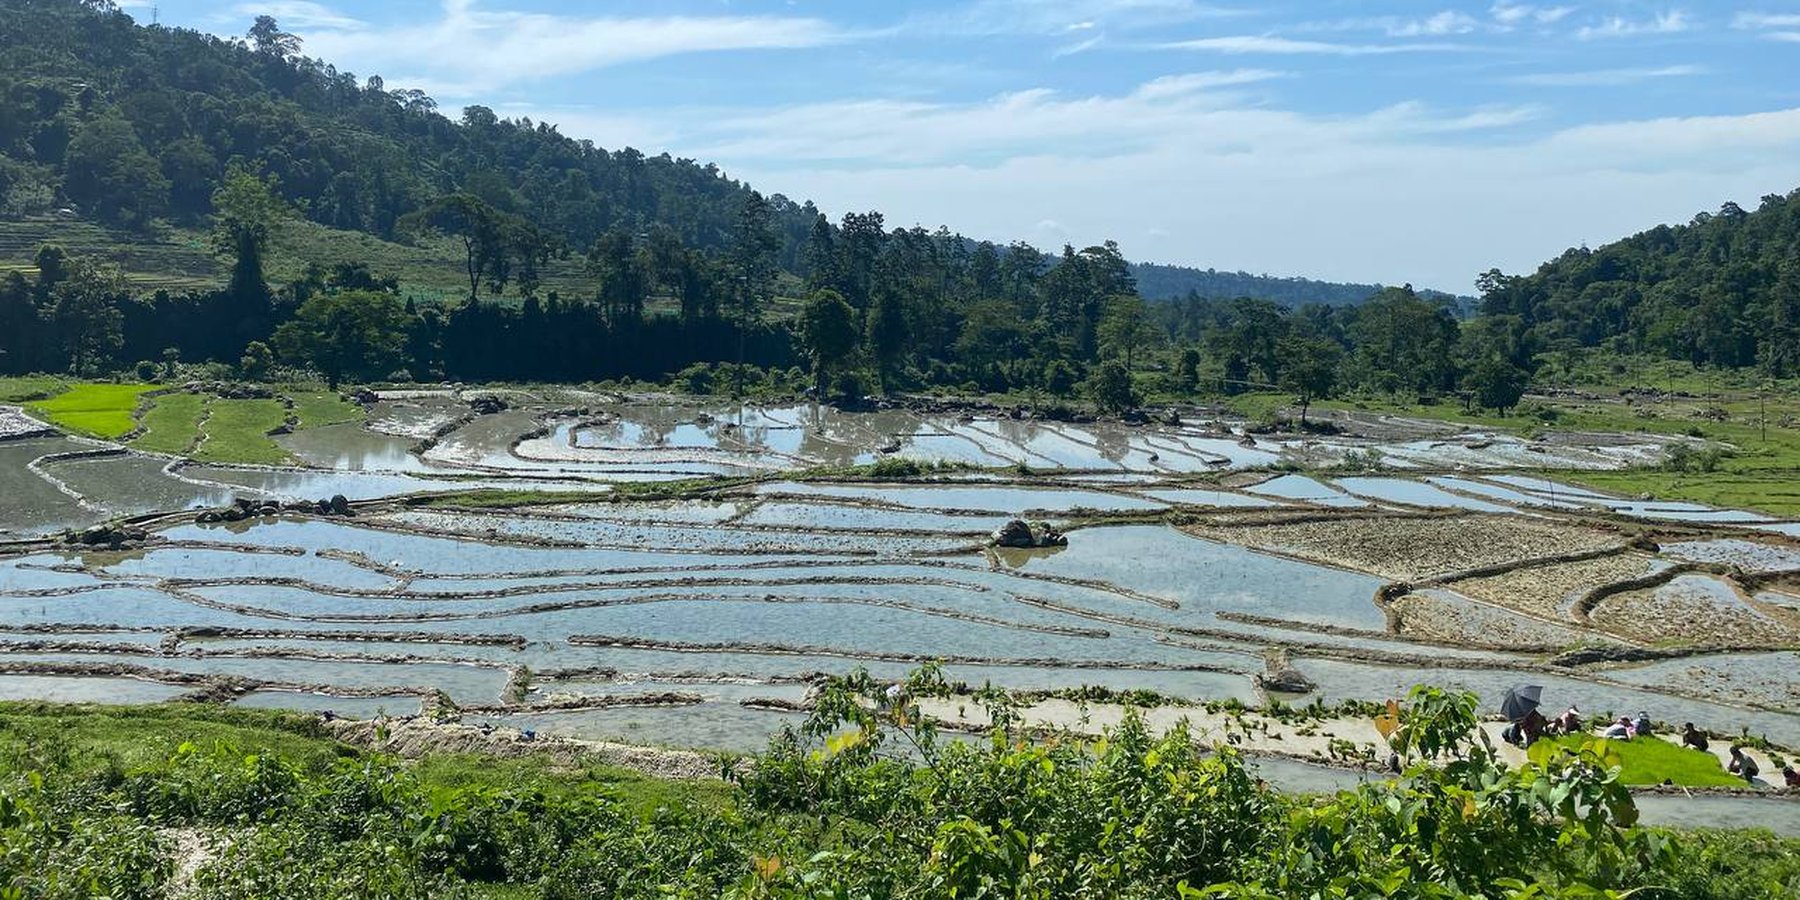 Consolidated Terraces (Irrigated Paddy Fields)